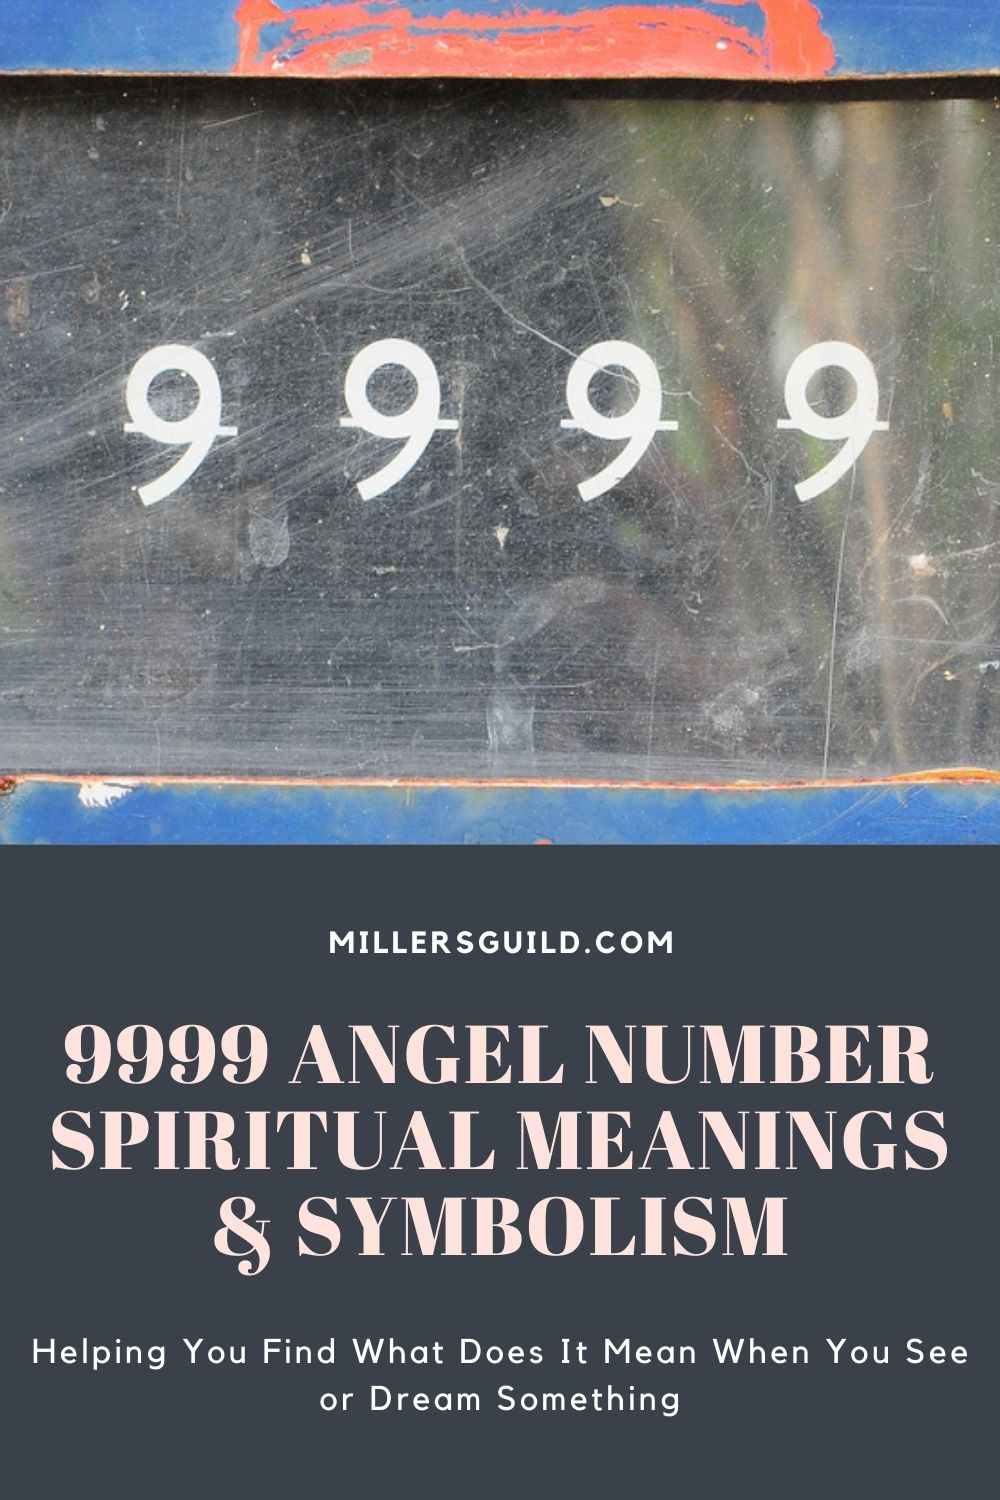 9999 Angel Number Spiritual Meanings & Symbolism 2